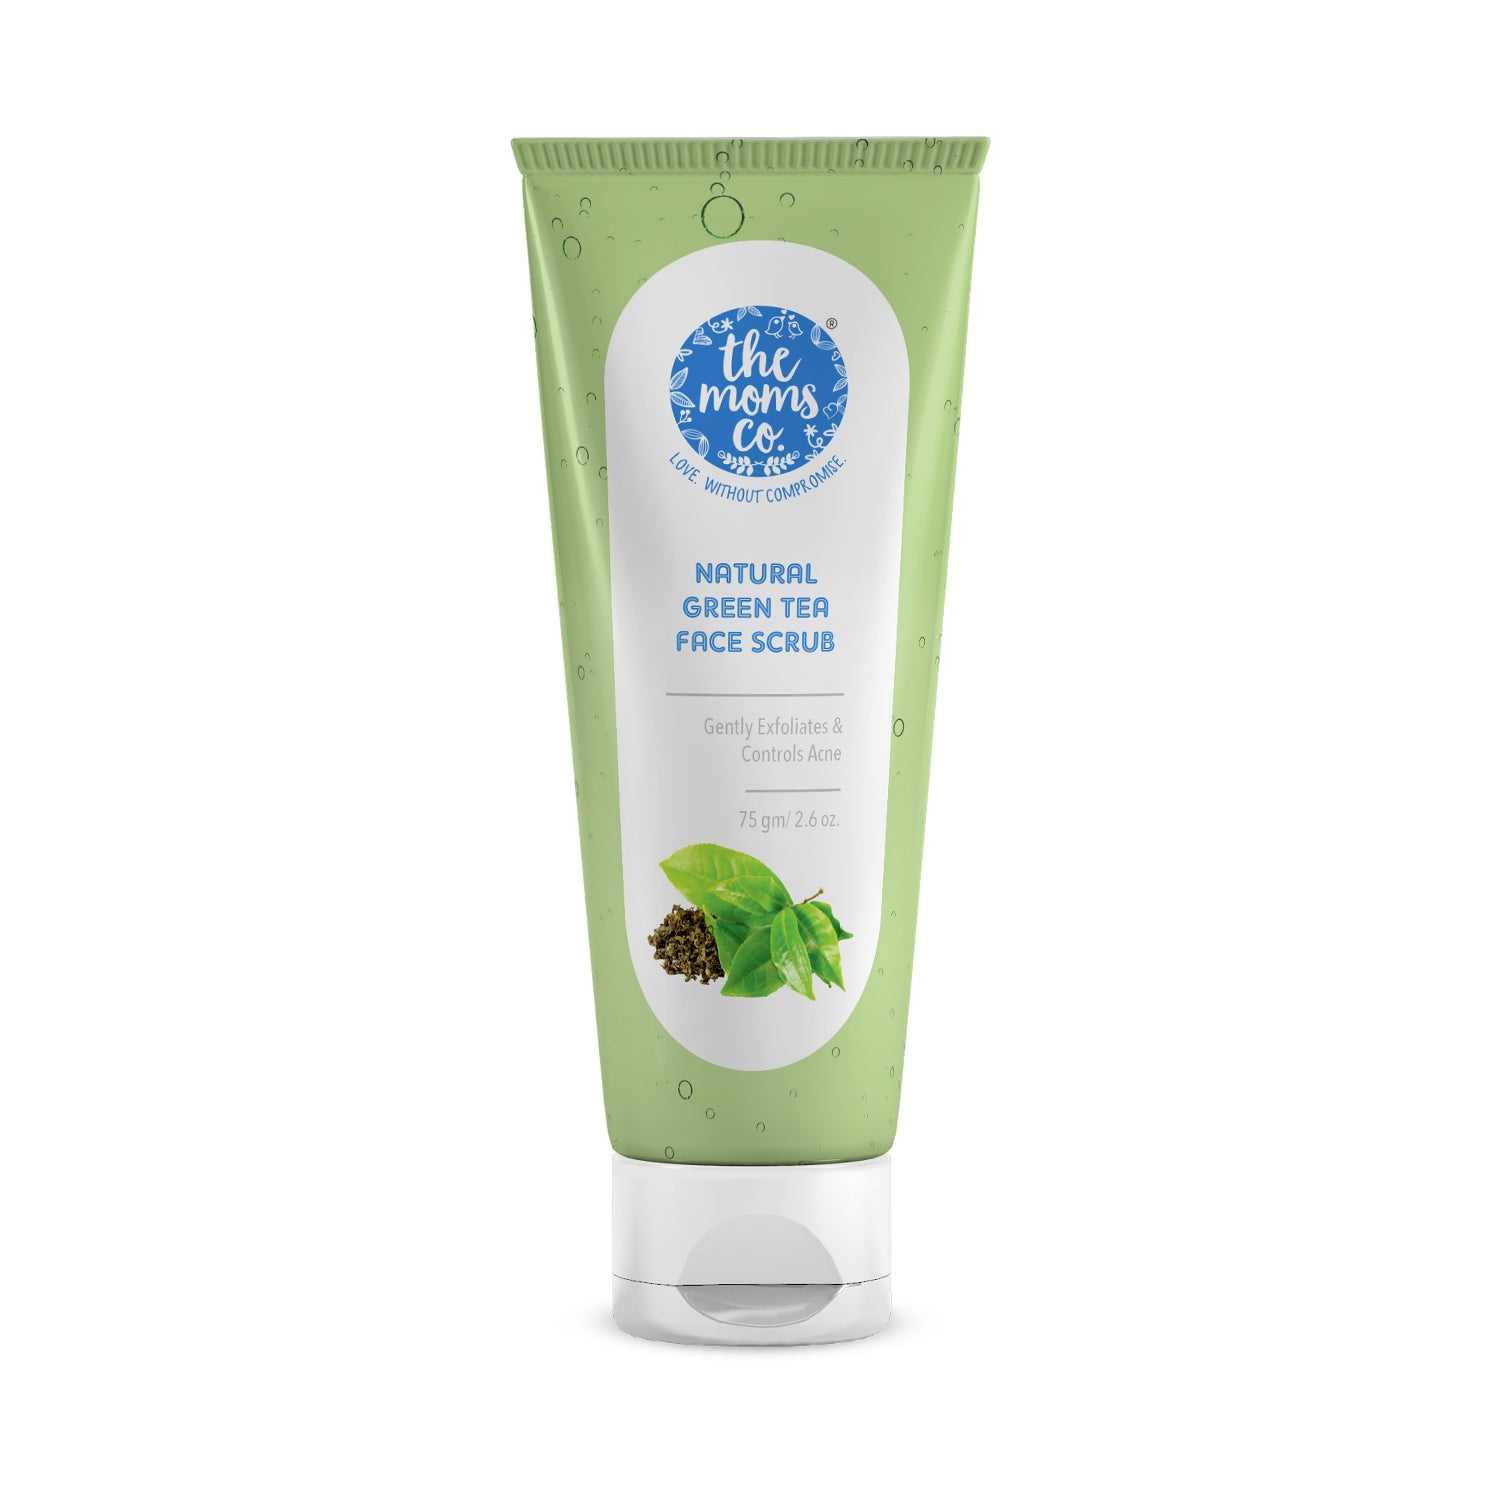 The Moms Co. Natural Green Tea Face Scrub I Control Acne & Gentle Exfoliation l With Tagua Nut , Black Sand and Vitamin C l All Skin Types (75 gms)